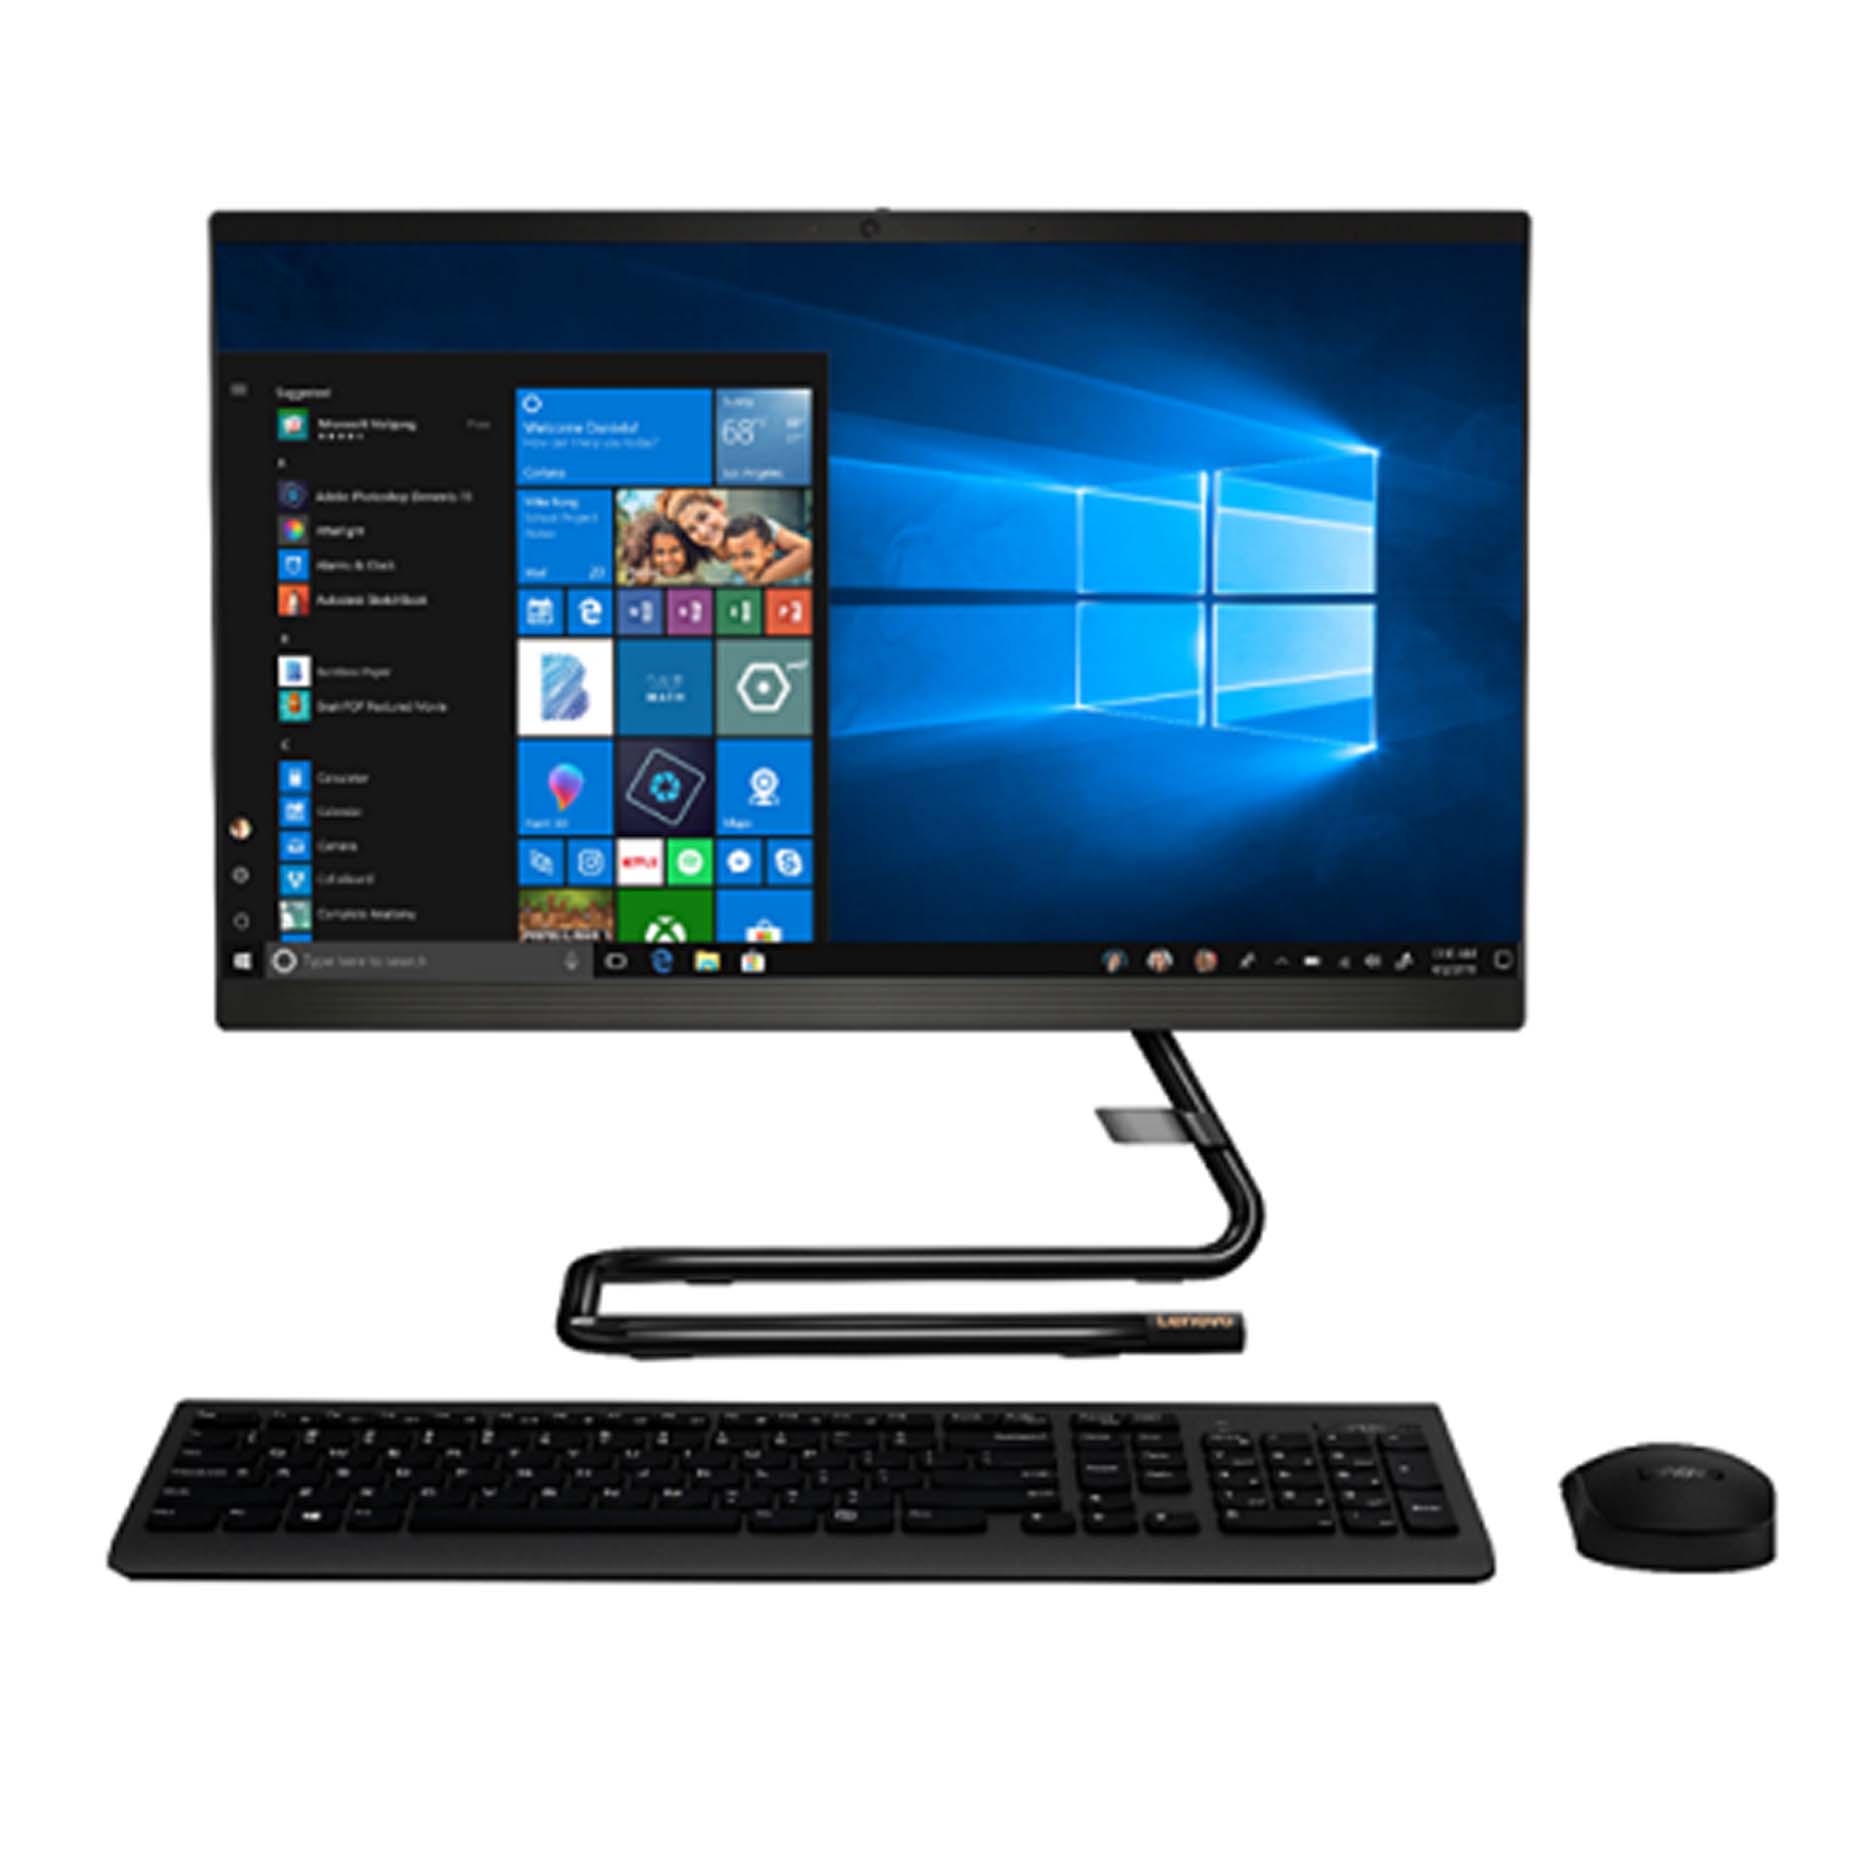 Harga Lenovo IdeaCentre A340-22ICB 61ID All in One i5-9400T 8GB 1TB Integrated Win10 21.5 Inch Black